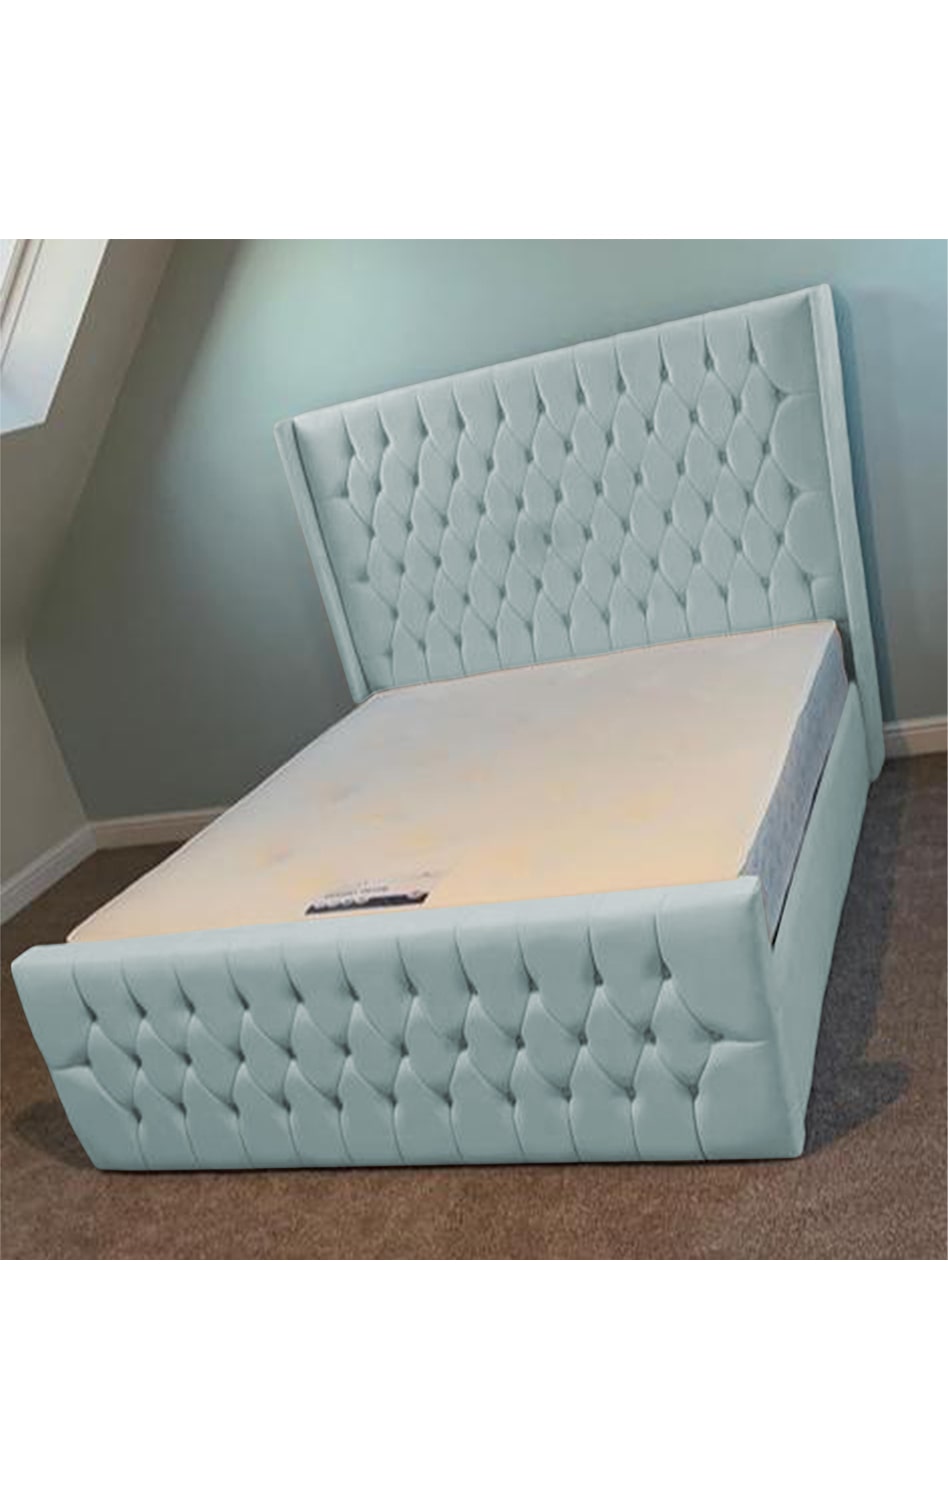 West Wings Upholstered Bed Frame with Ottoman Storage Options Britainsleep